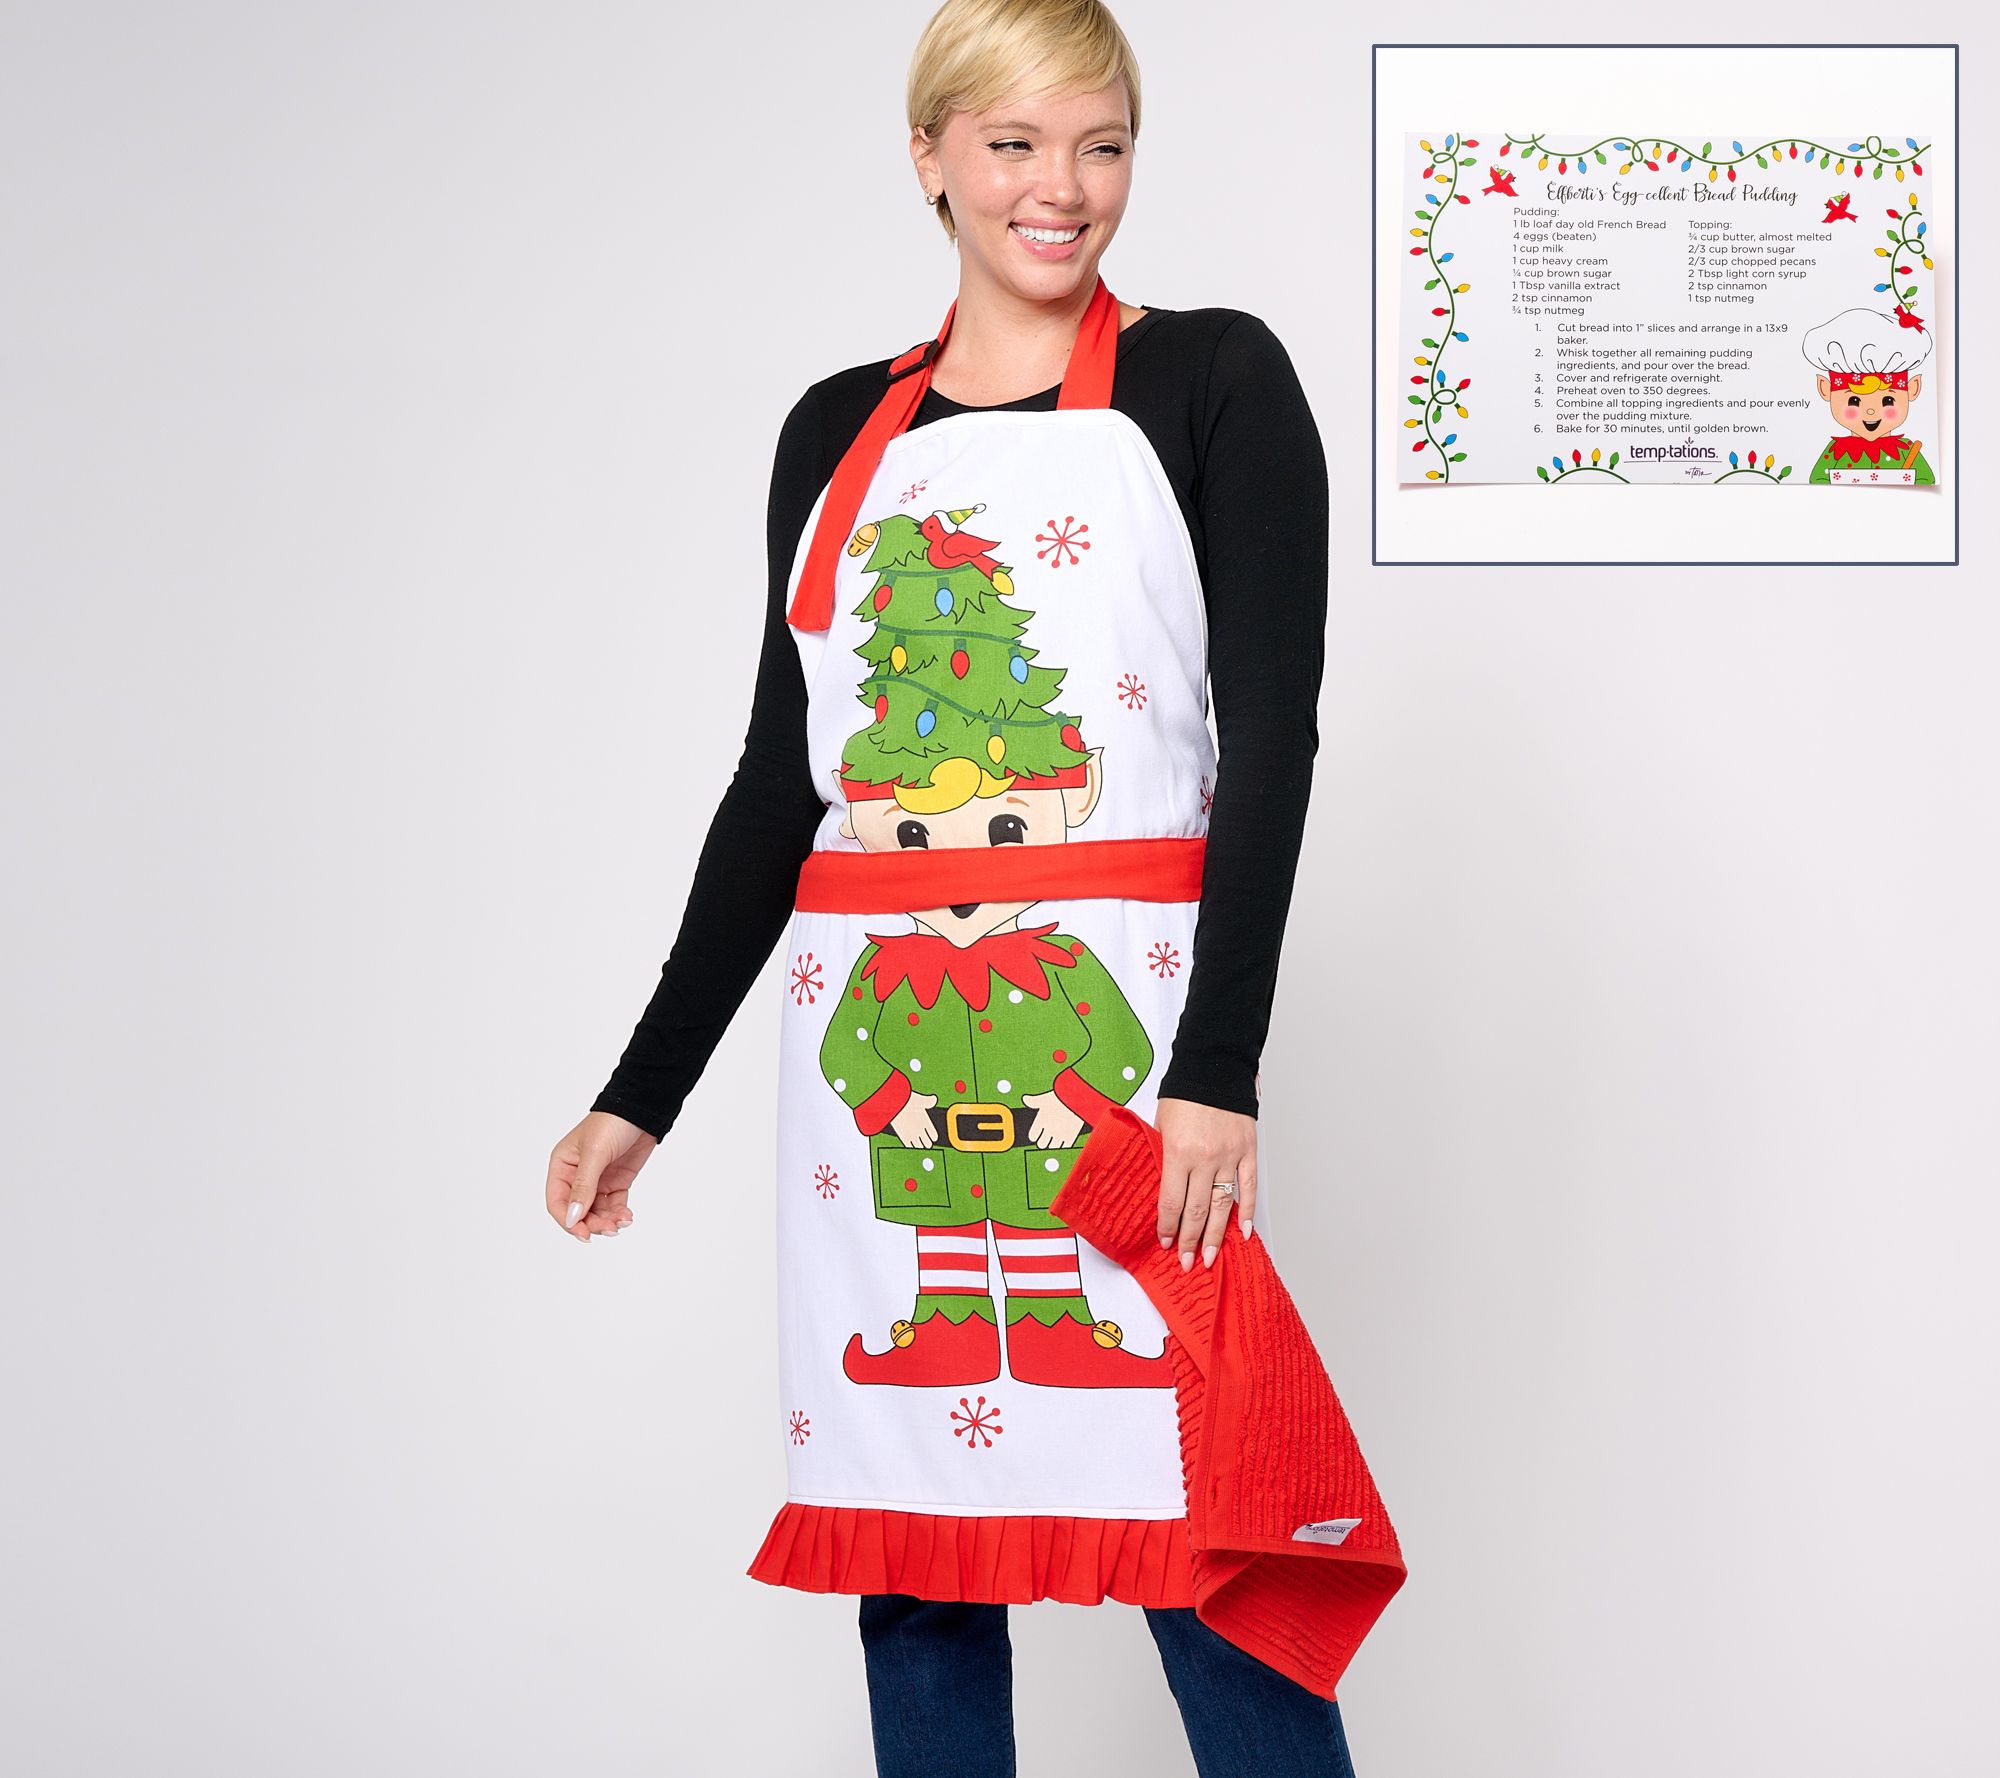 Egg Gathering and Collecting Apron Kitchen Egg Apron for Men and Women  -Pretty arts products co.,ltd